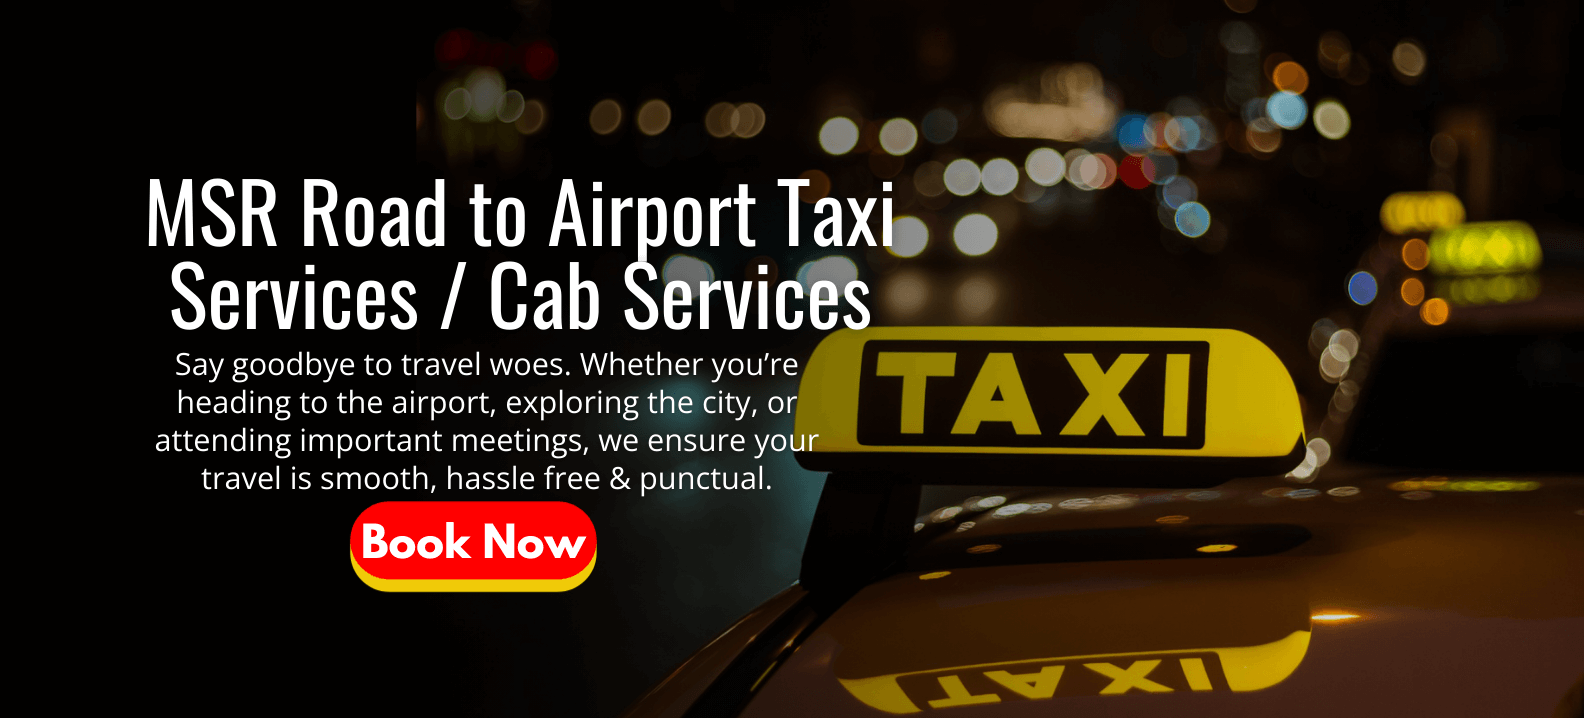 MSR Road to Airport Taxi Services _ Cab Services